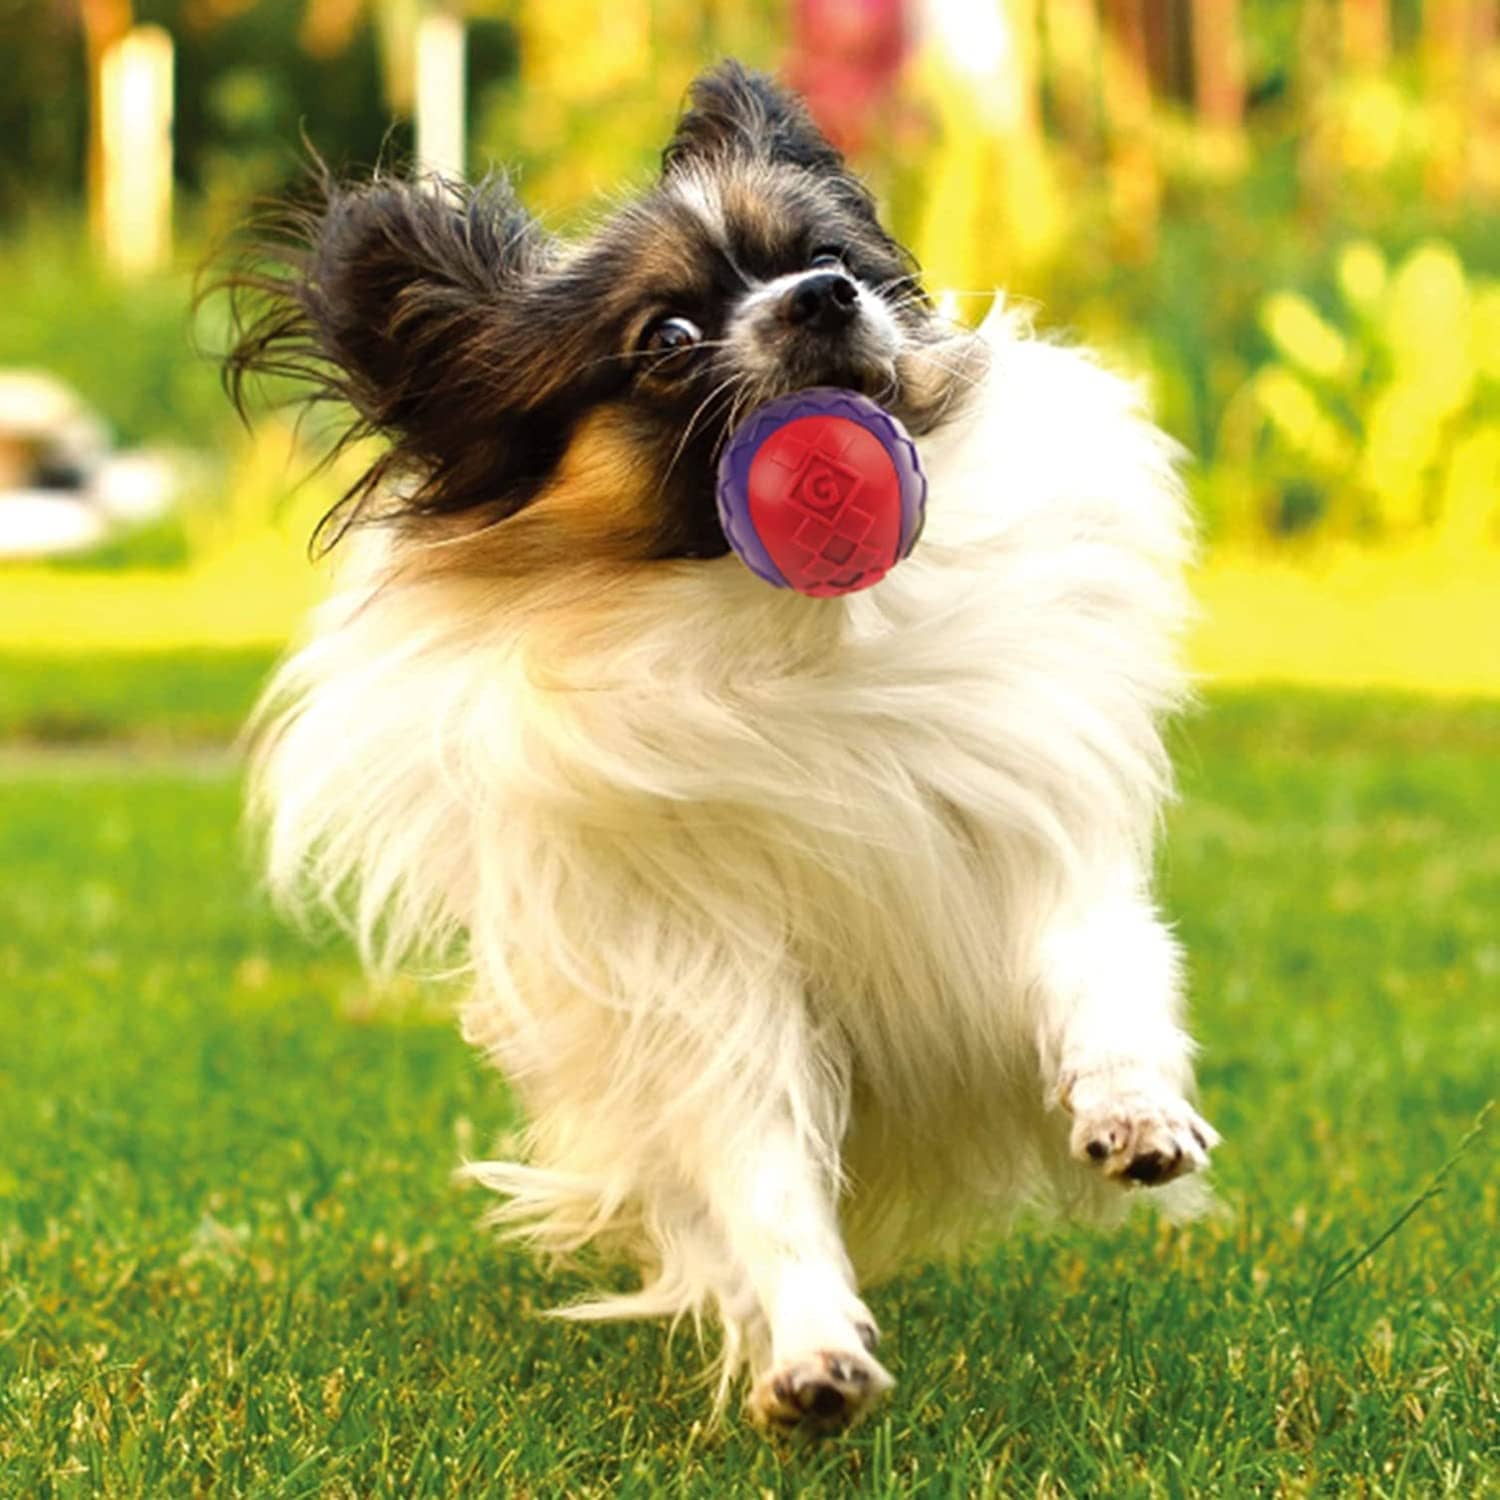 GiGwi Ball Squeaker Toy for Dogs (Pack of 2)